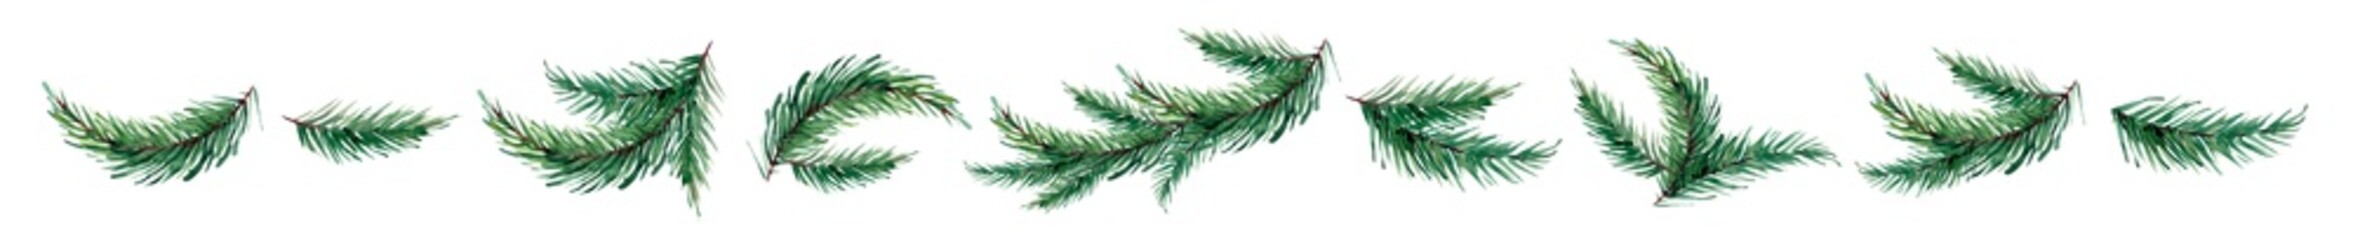 watercolor image of spruce branches isolated on a white background.